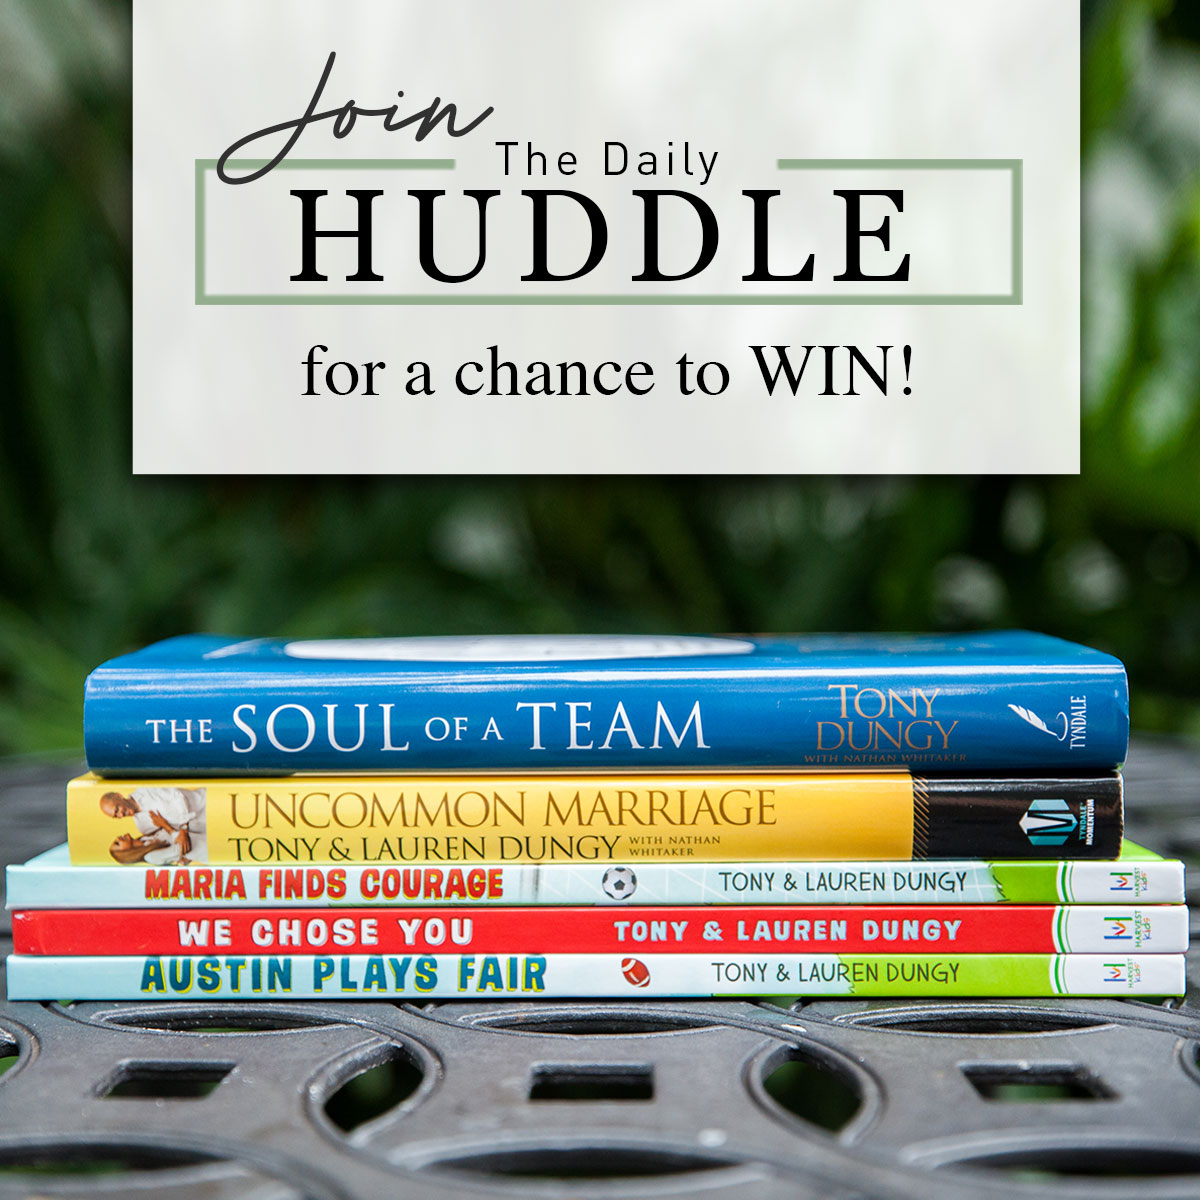 The Daily Huddle  Dungy Family Foundation